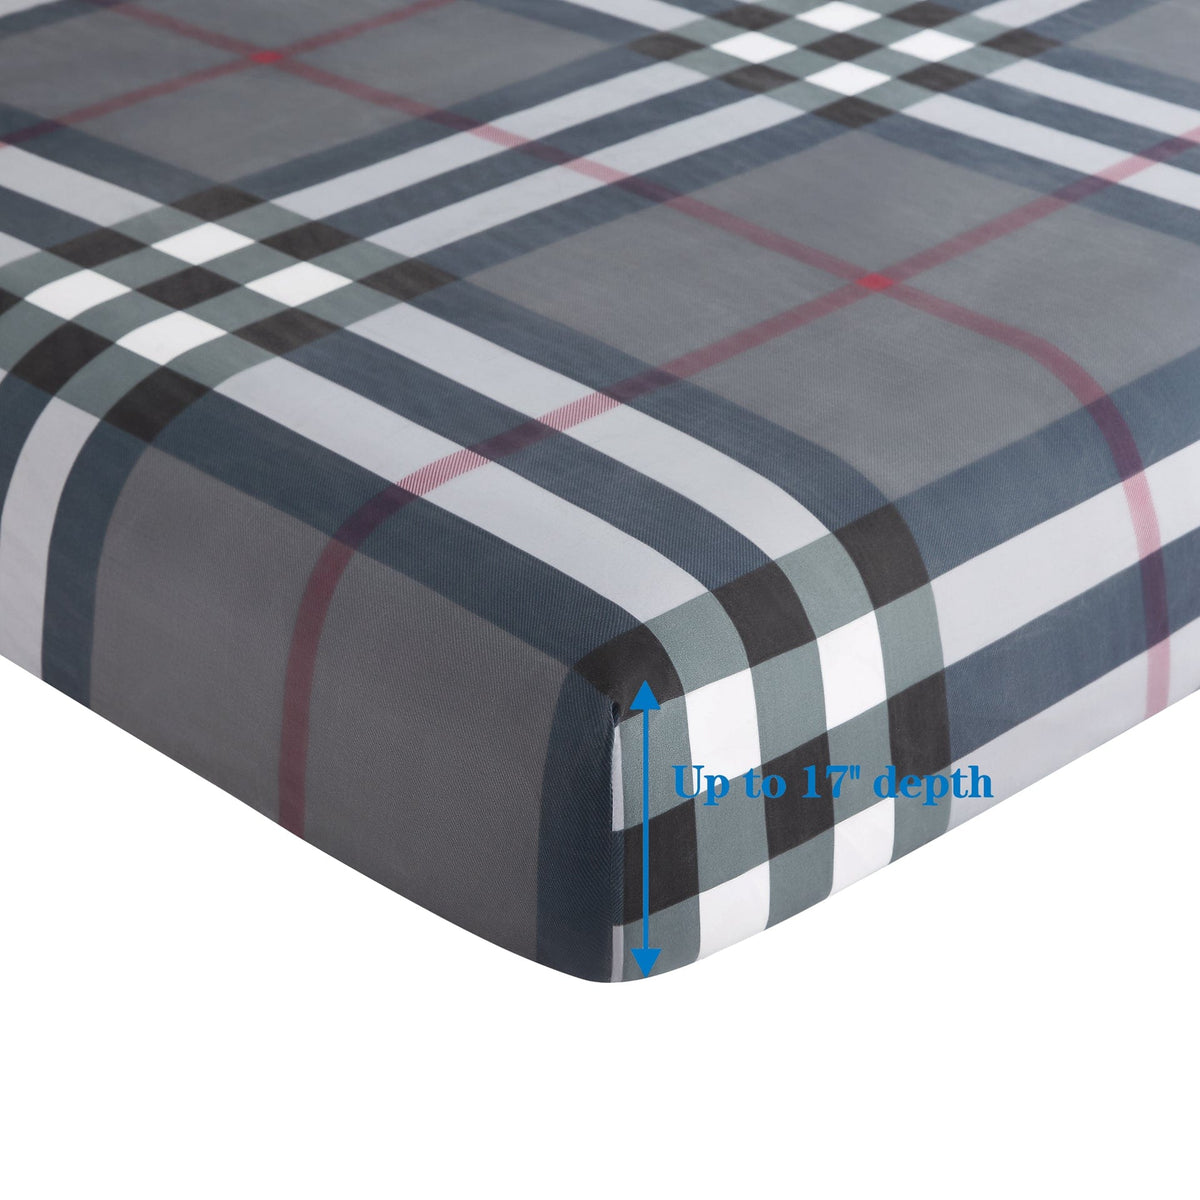 Soft Silky Rich Printed Rayon from Bamboo All Season, Duvet Cover Fitted Sheet Ensemble Bedding Set with Zipper and Corner Tie, Modern Grey Tartan Pattern